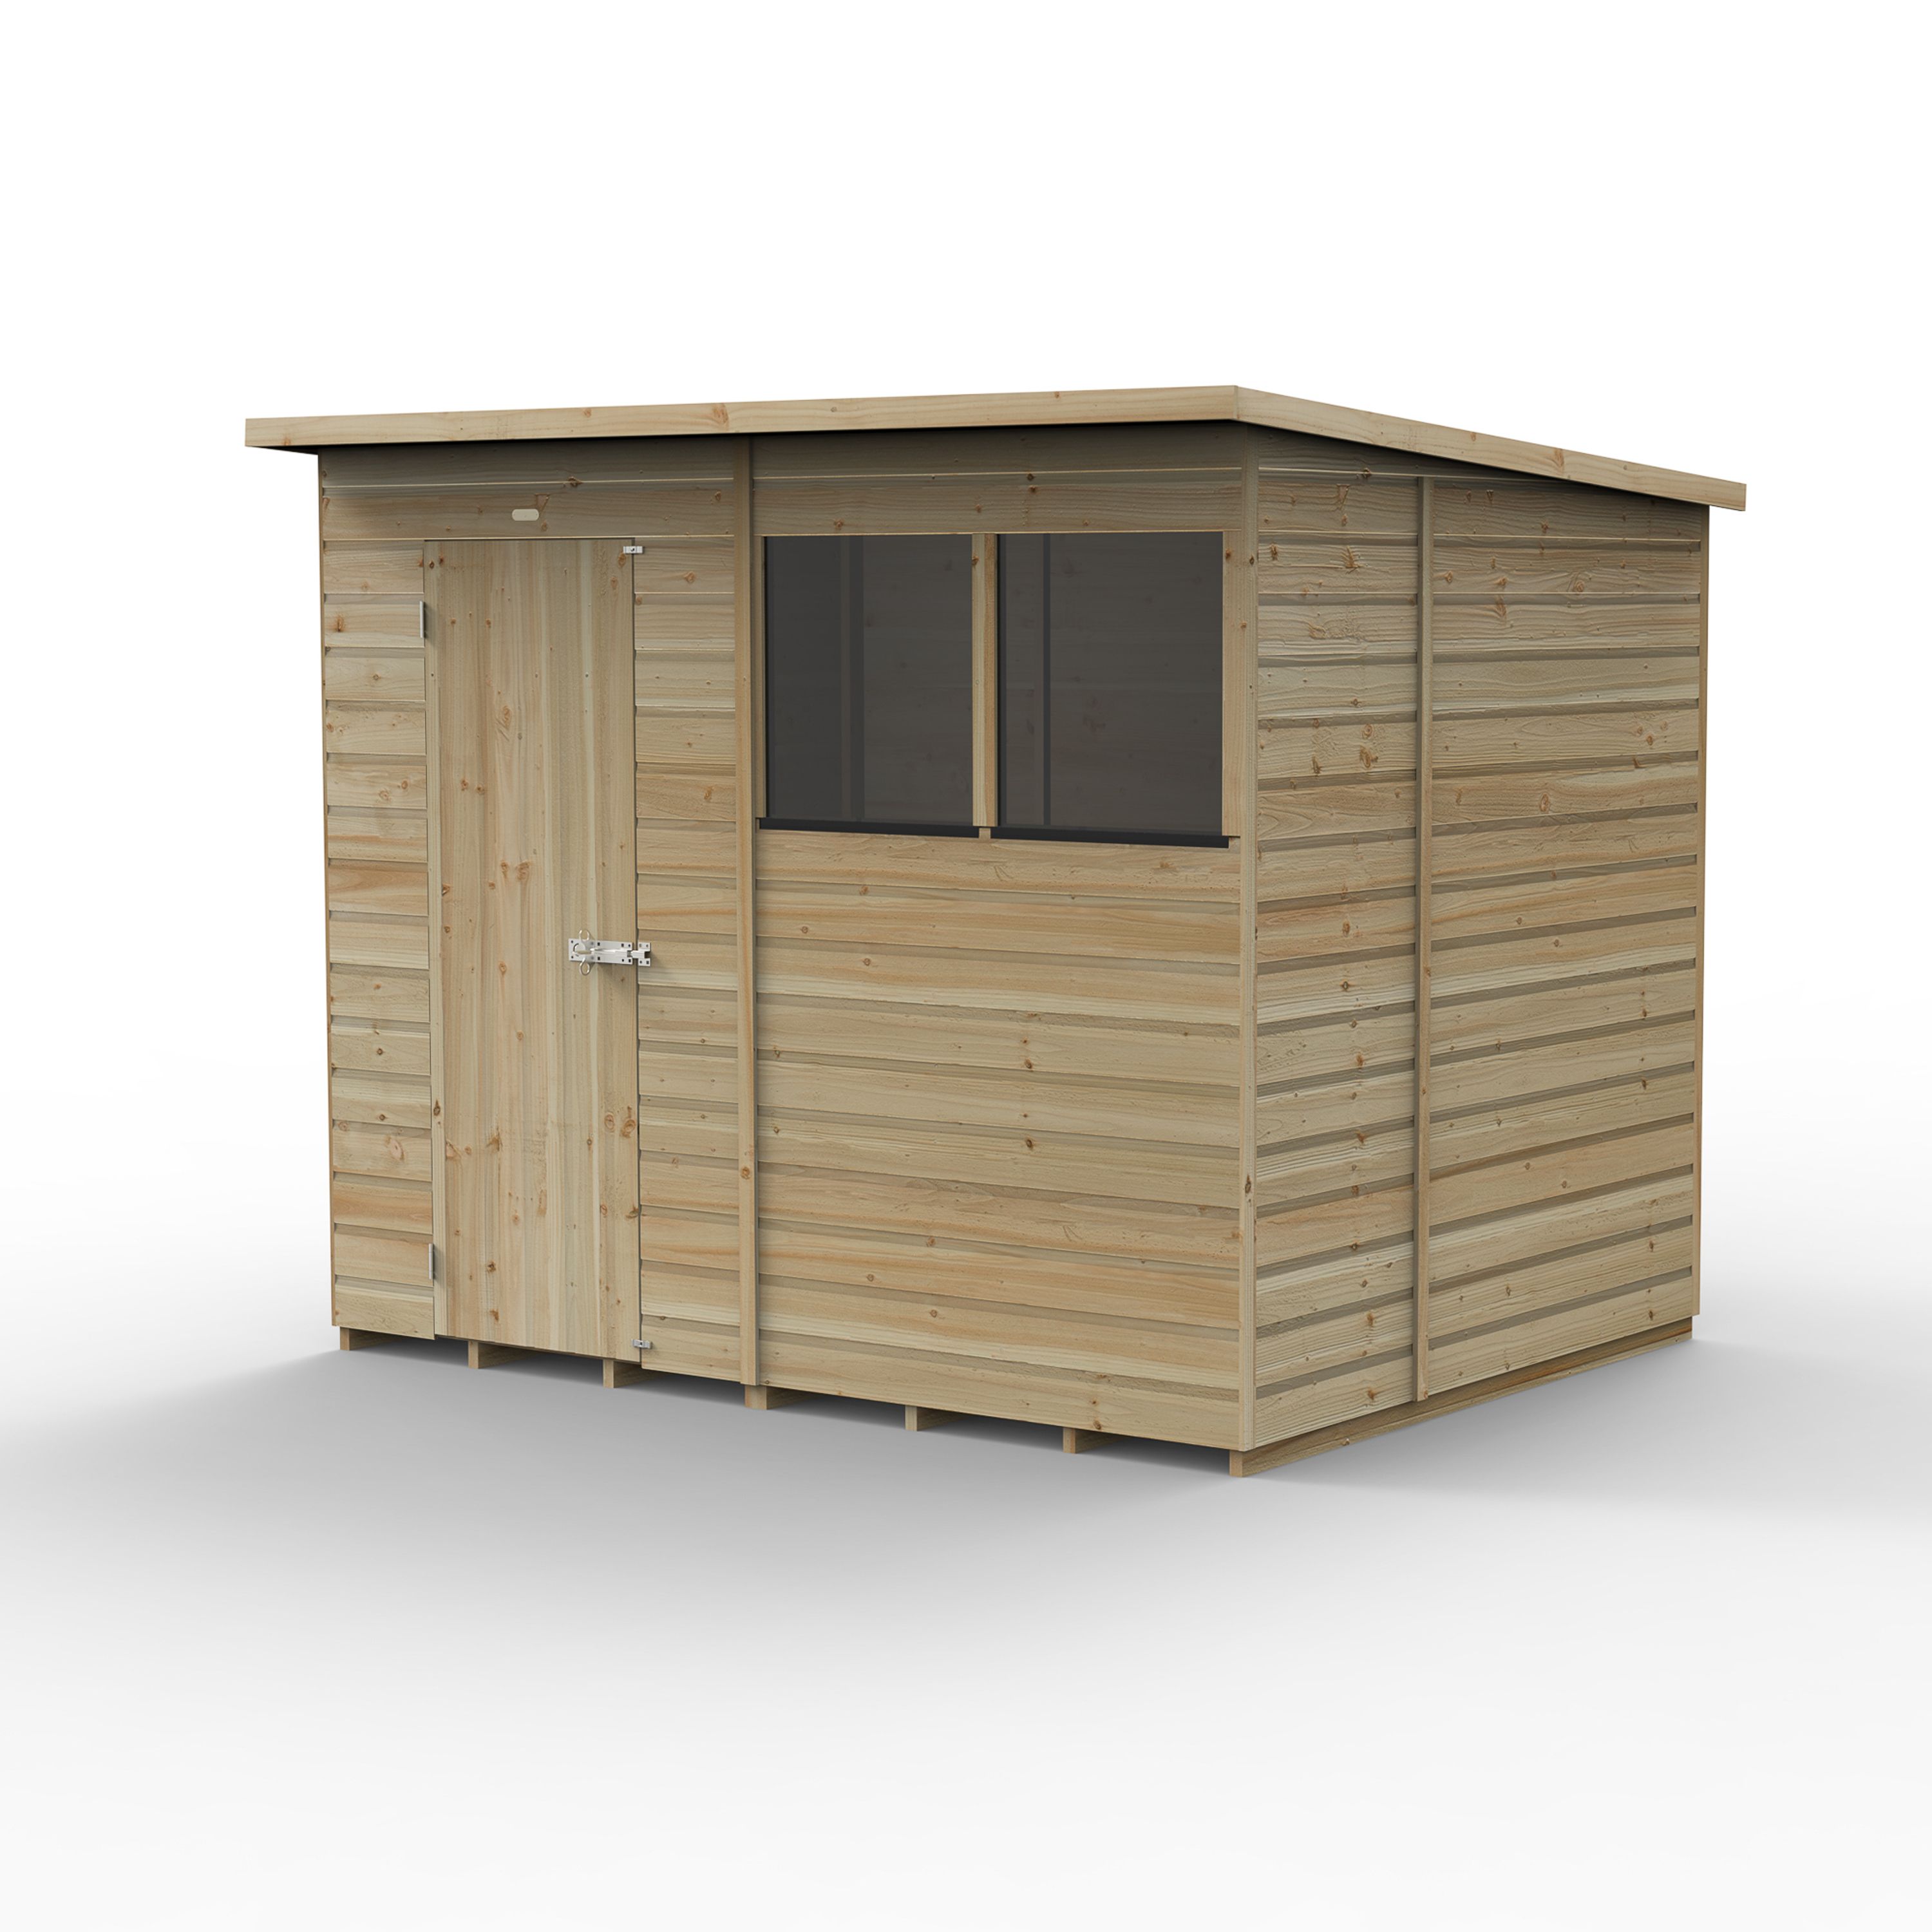 Forest Garden Beckwood 8x6 ft Pent Natural timber Wooden Shed with floor & 2 windows (Base included)